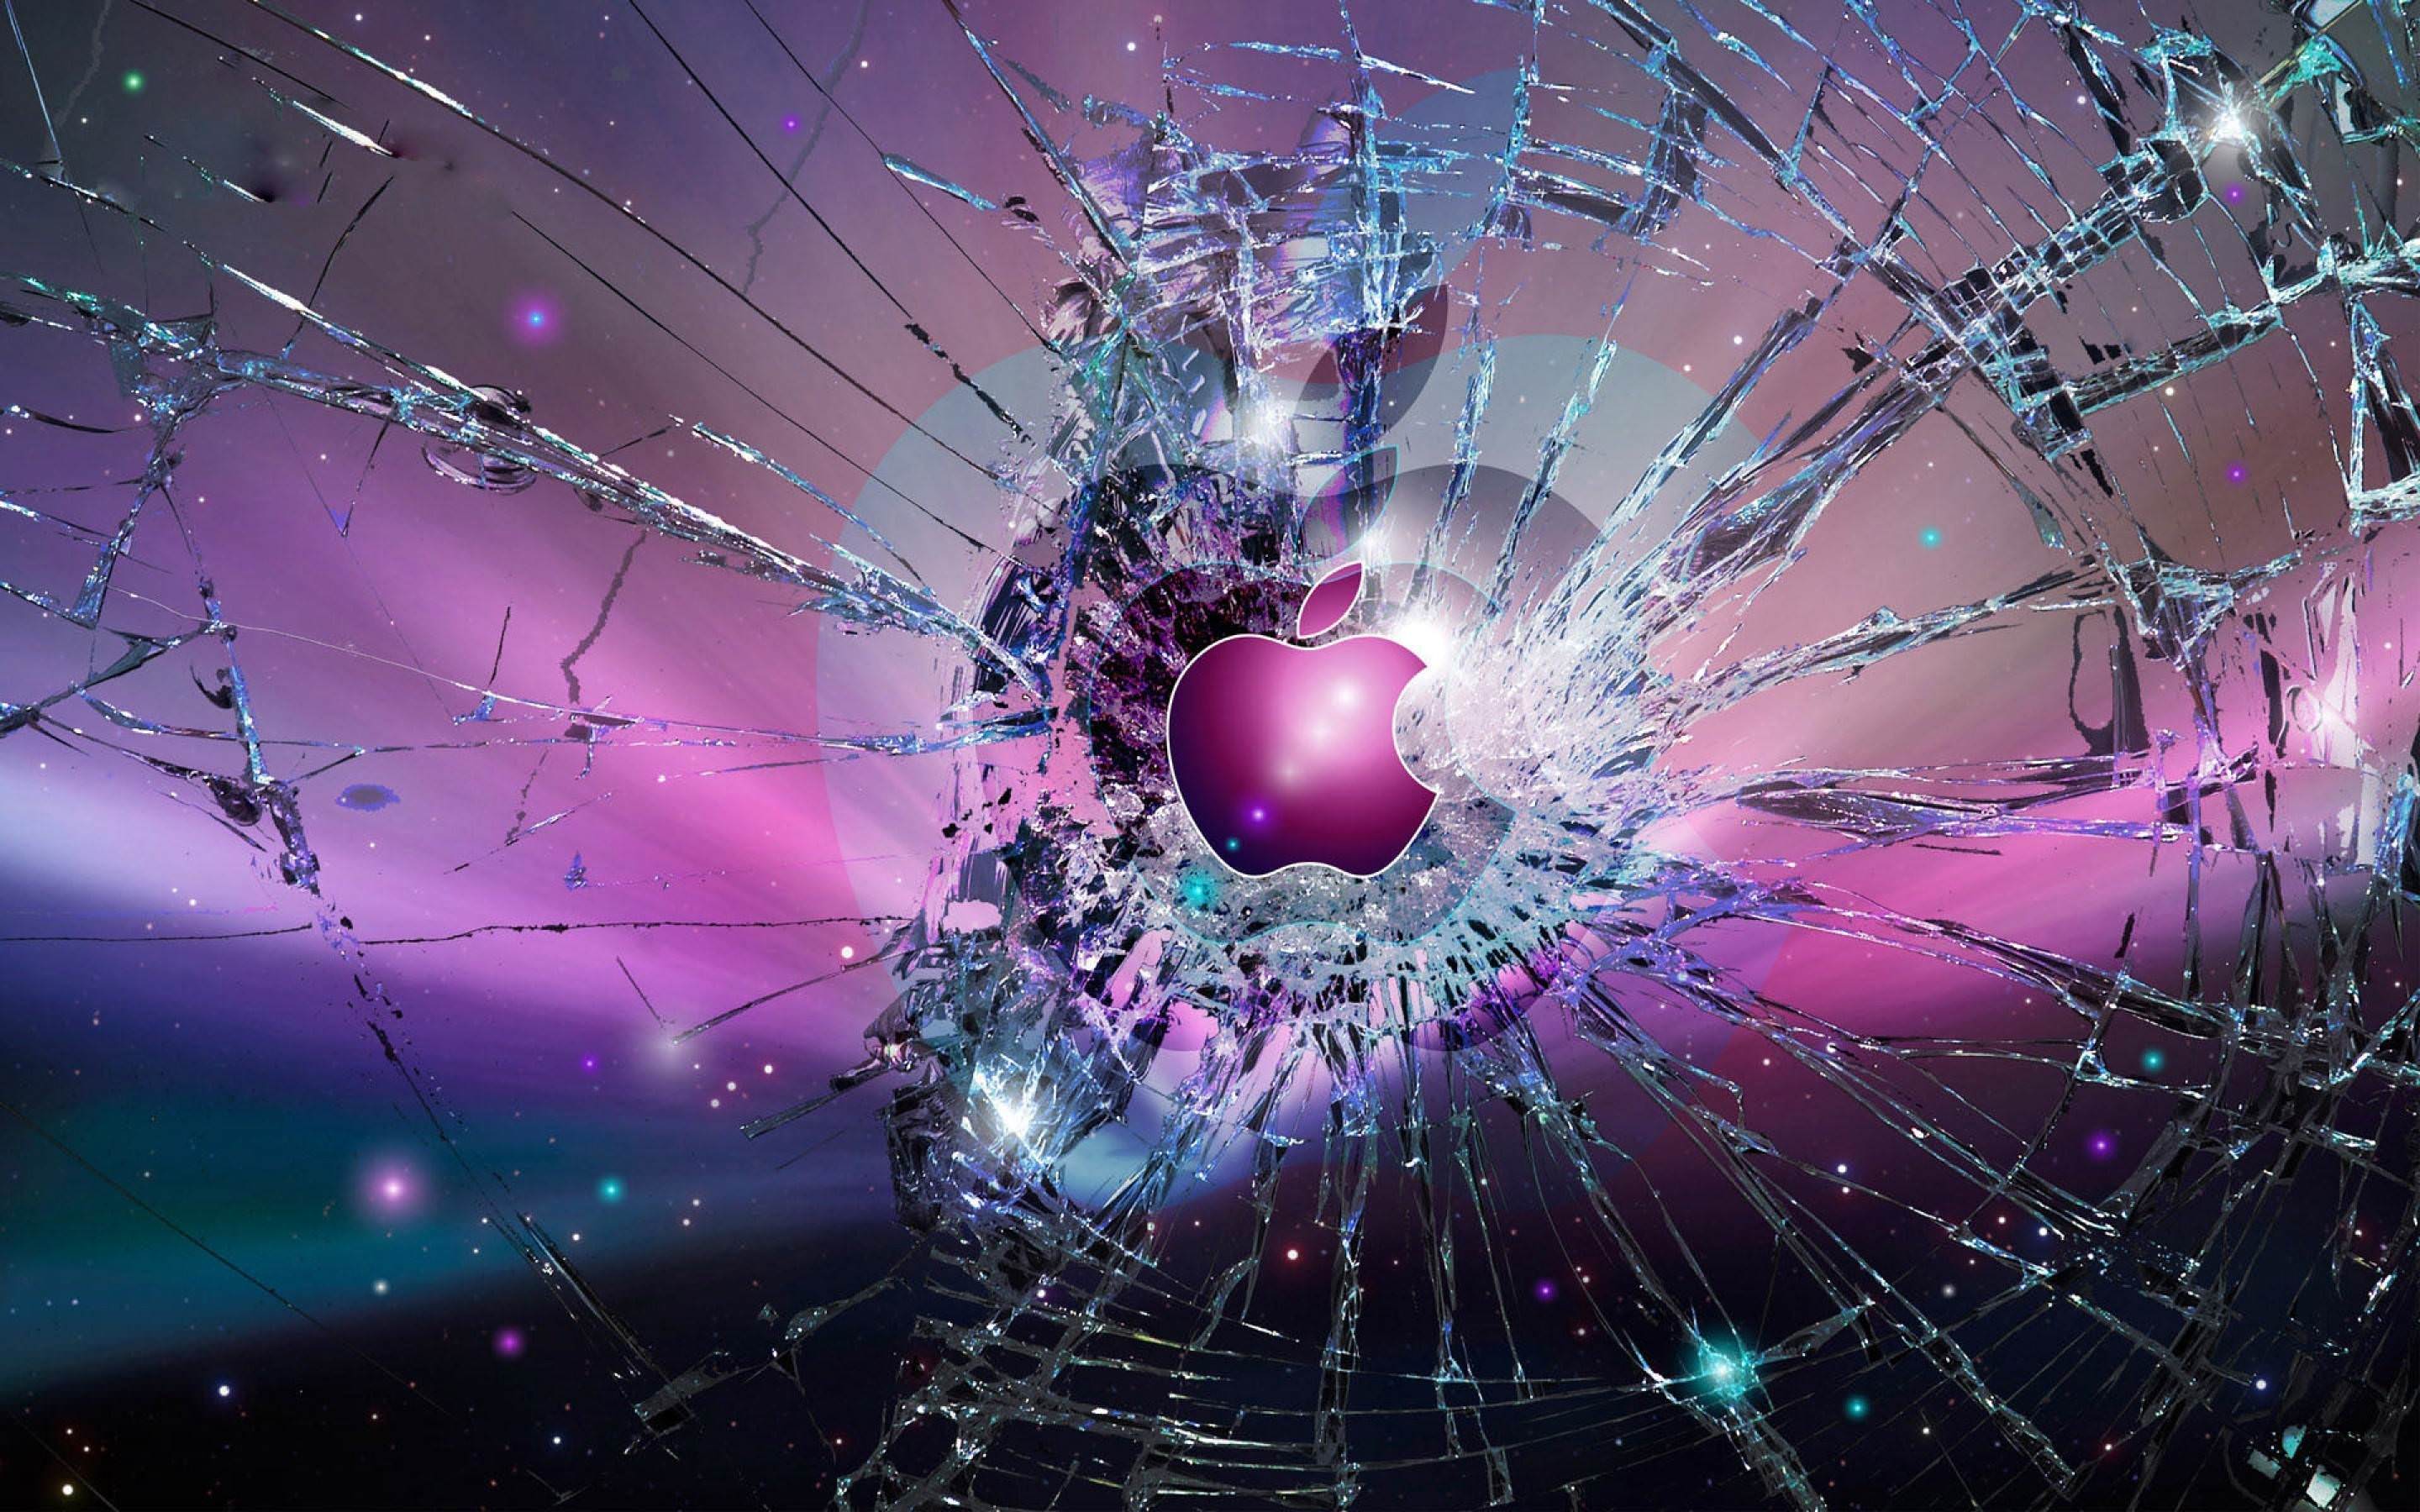 Cracked Screen Wallpapers in PSD